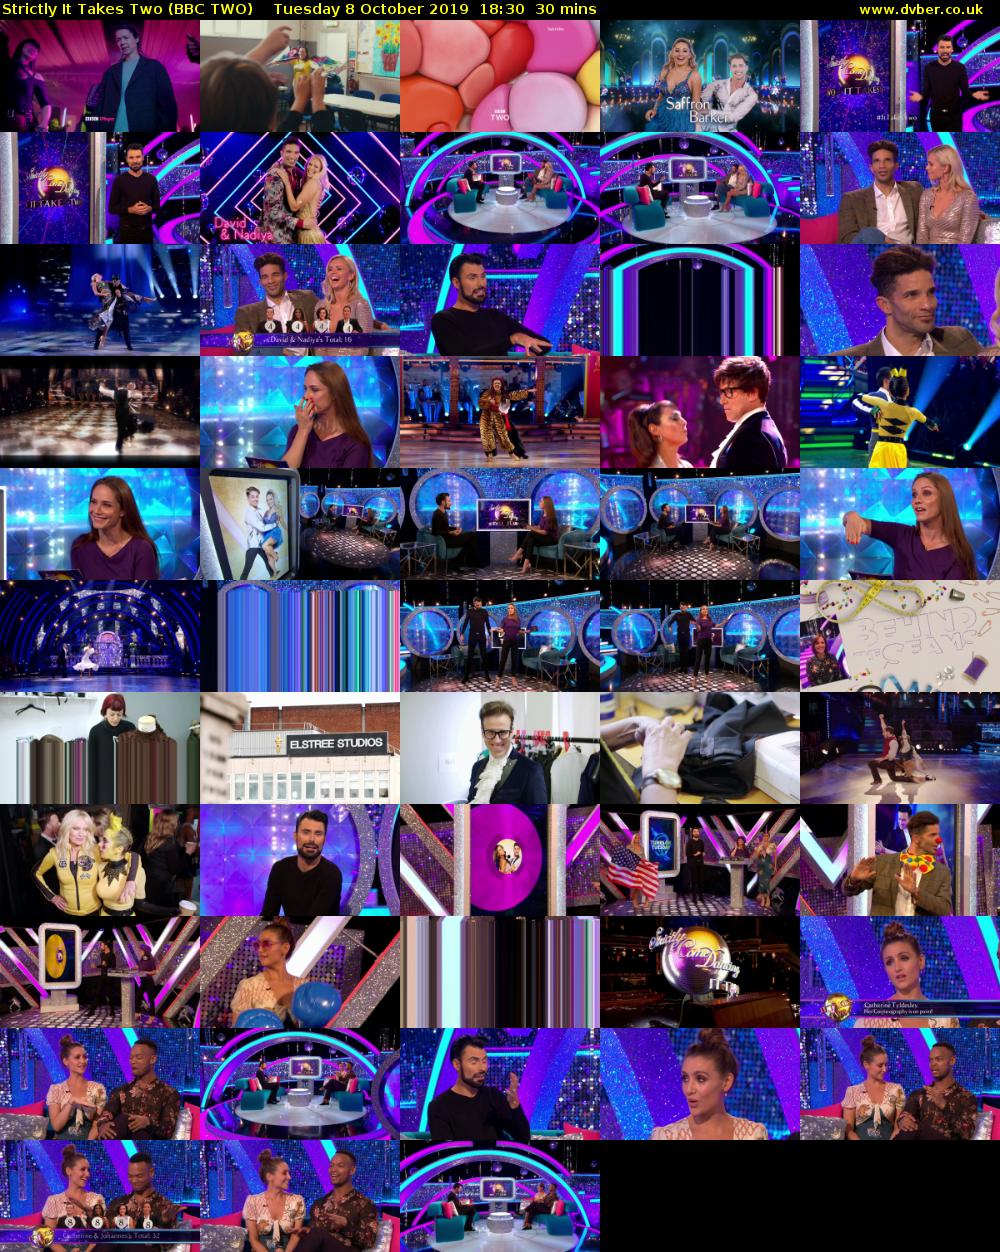 Strictly It Takes Two (BBC TWO) Tuesday 8 October 2019 18:30 - 19:00